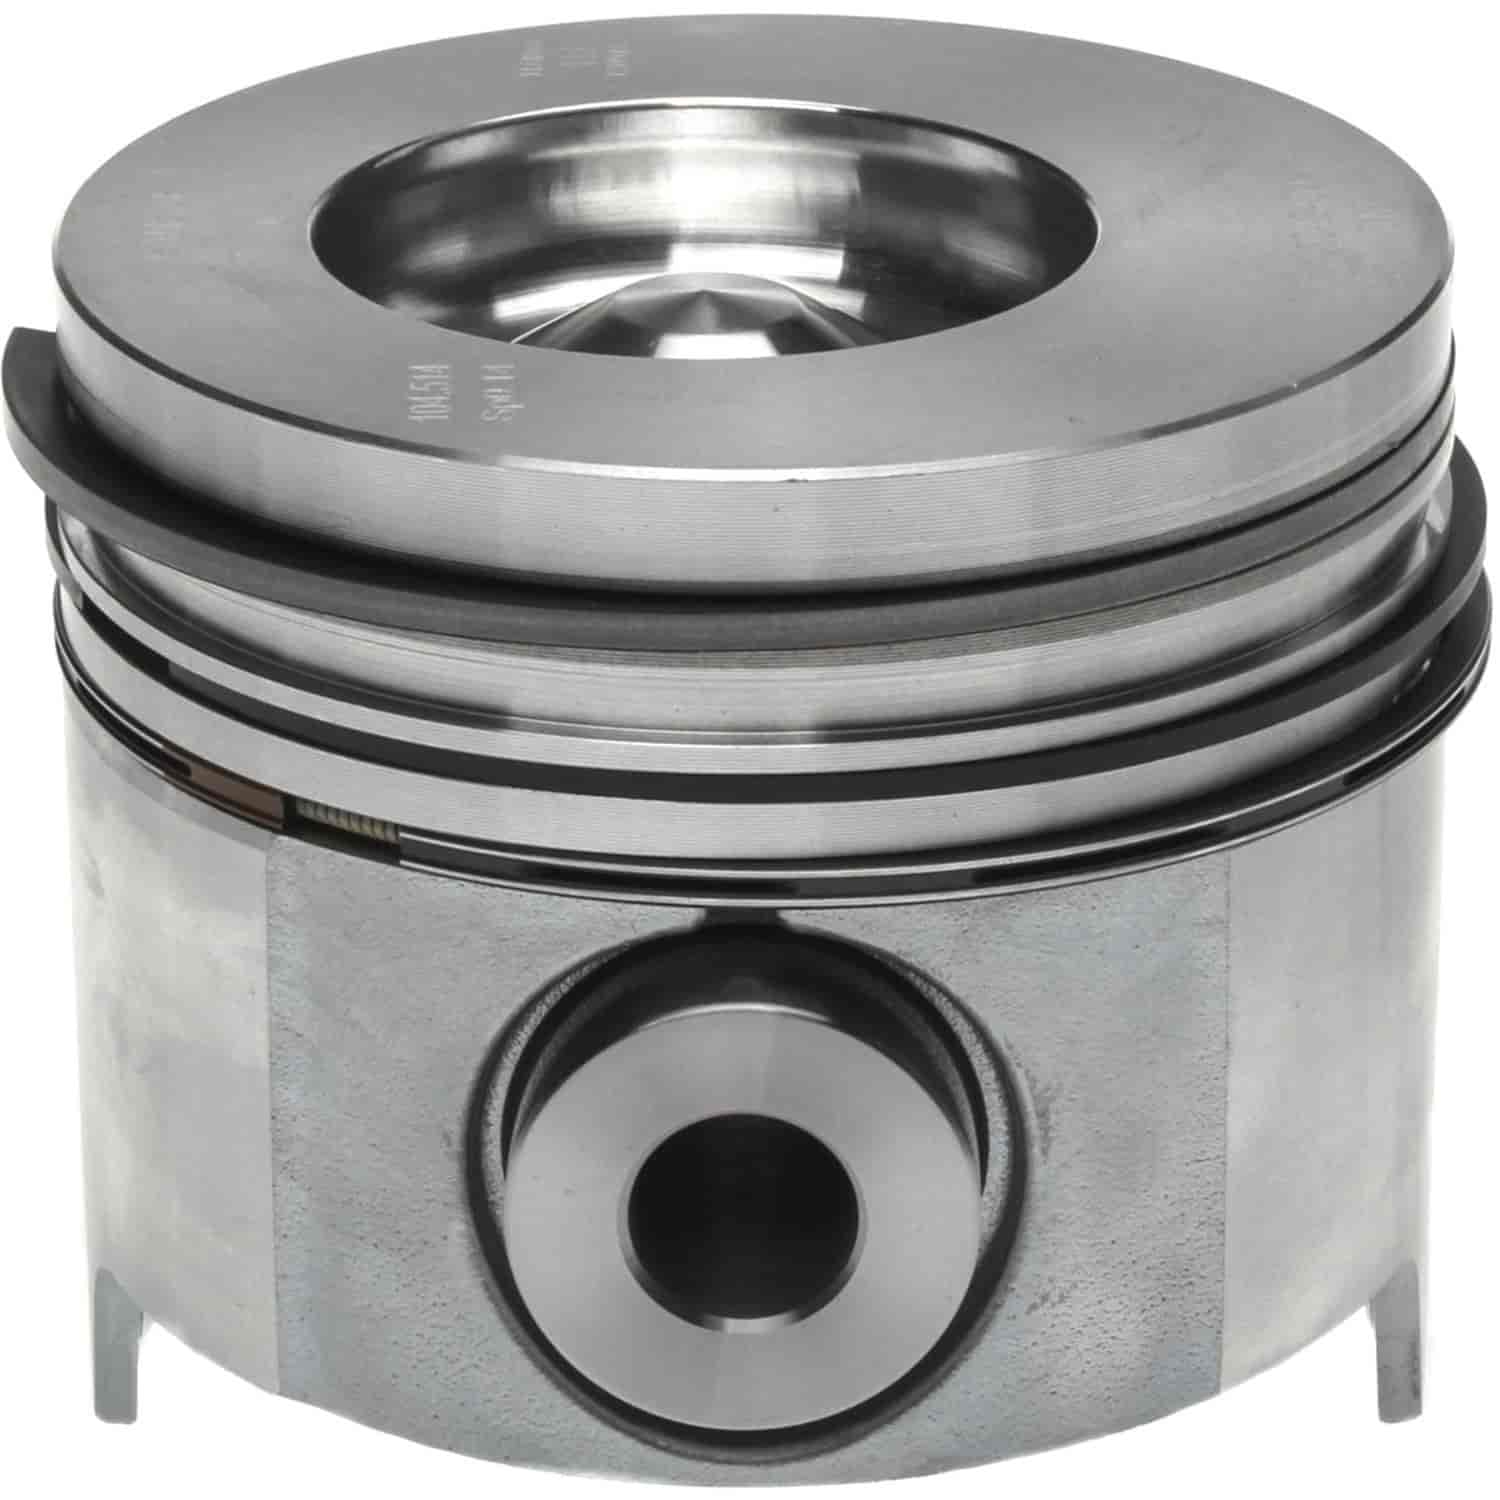 Piston and Rings Set 1988-1994 Ford/Navistar Powerstroke Diesel V8 7.3L with 4.140" Bore (+.030")